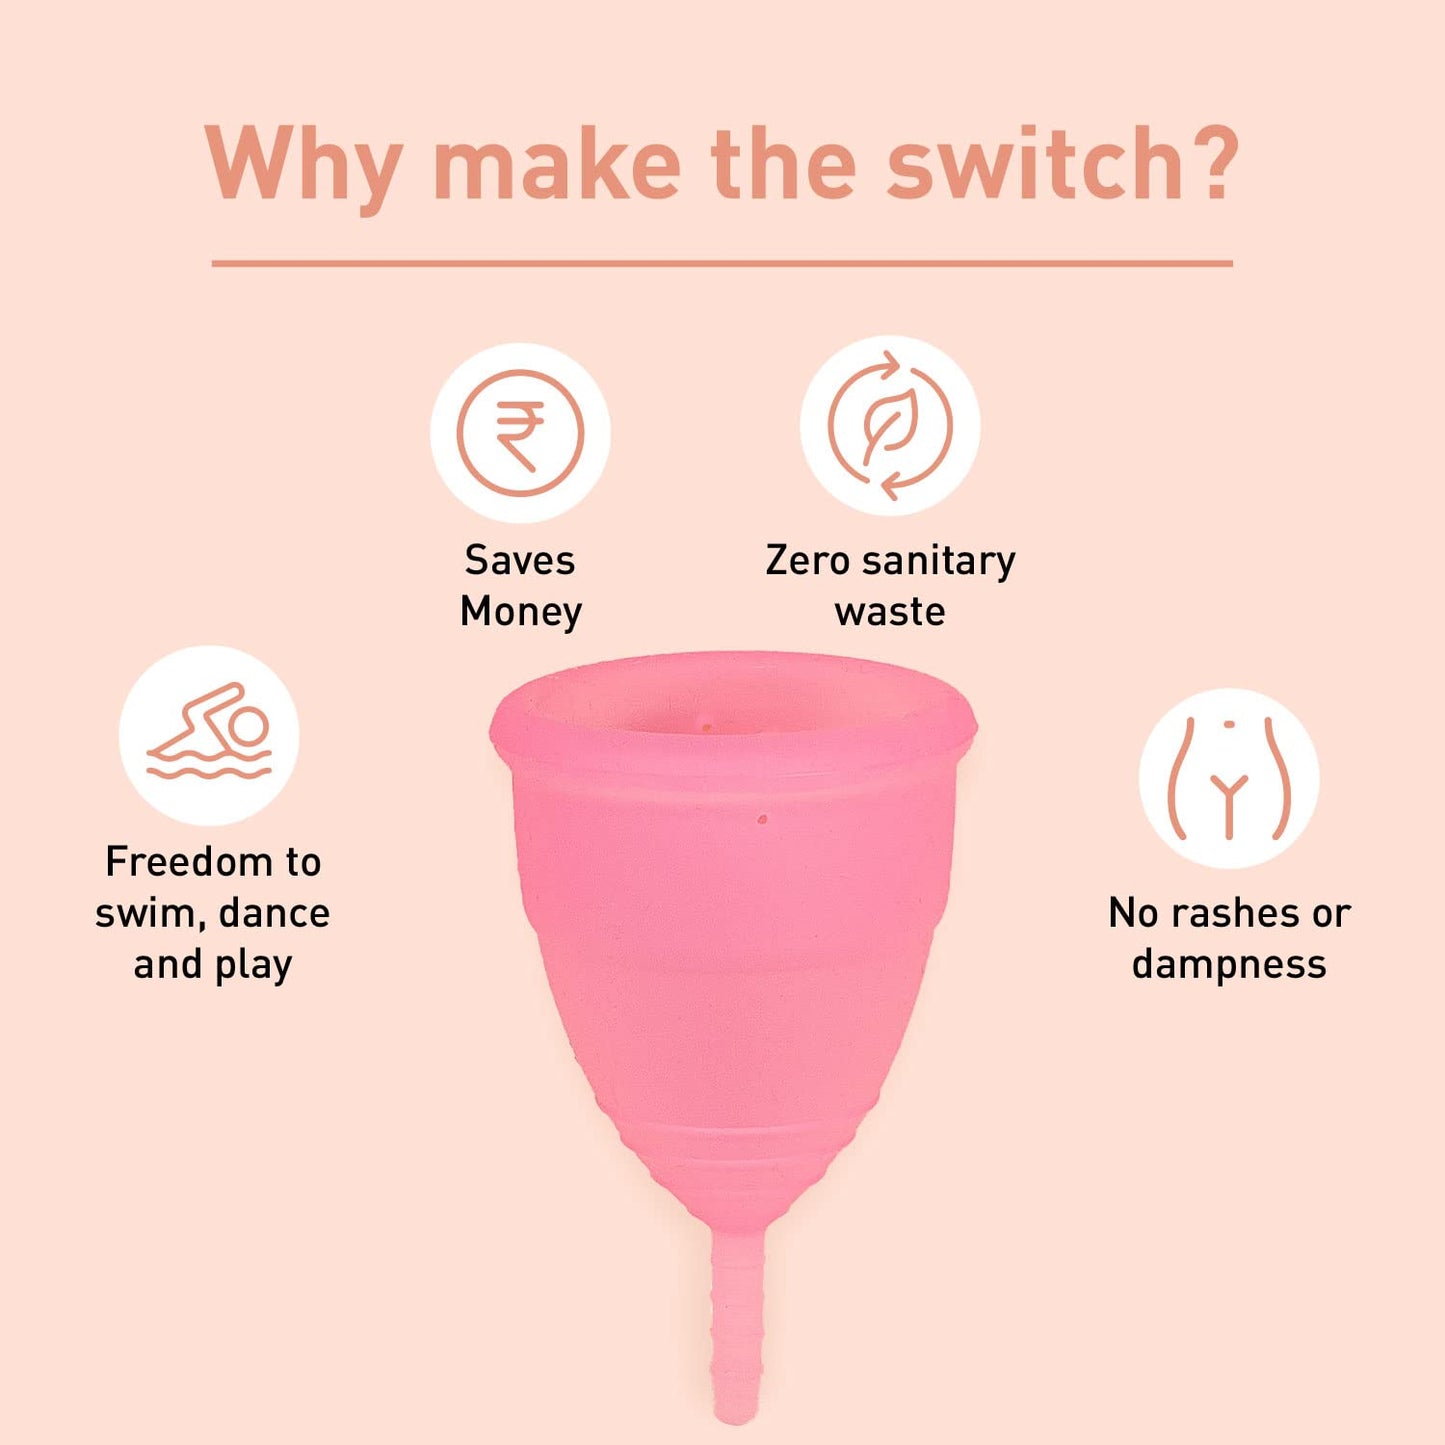 Sirona Pro Reusable Menstrual Cup for Women with Pouch - Mini Intimate Wash & Cup Wash | Wear for 8-10 Hours | FDA Approved | Period Cup Super Soft, Flexible, Made with Medical-Grade Silicone (Medium)